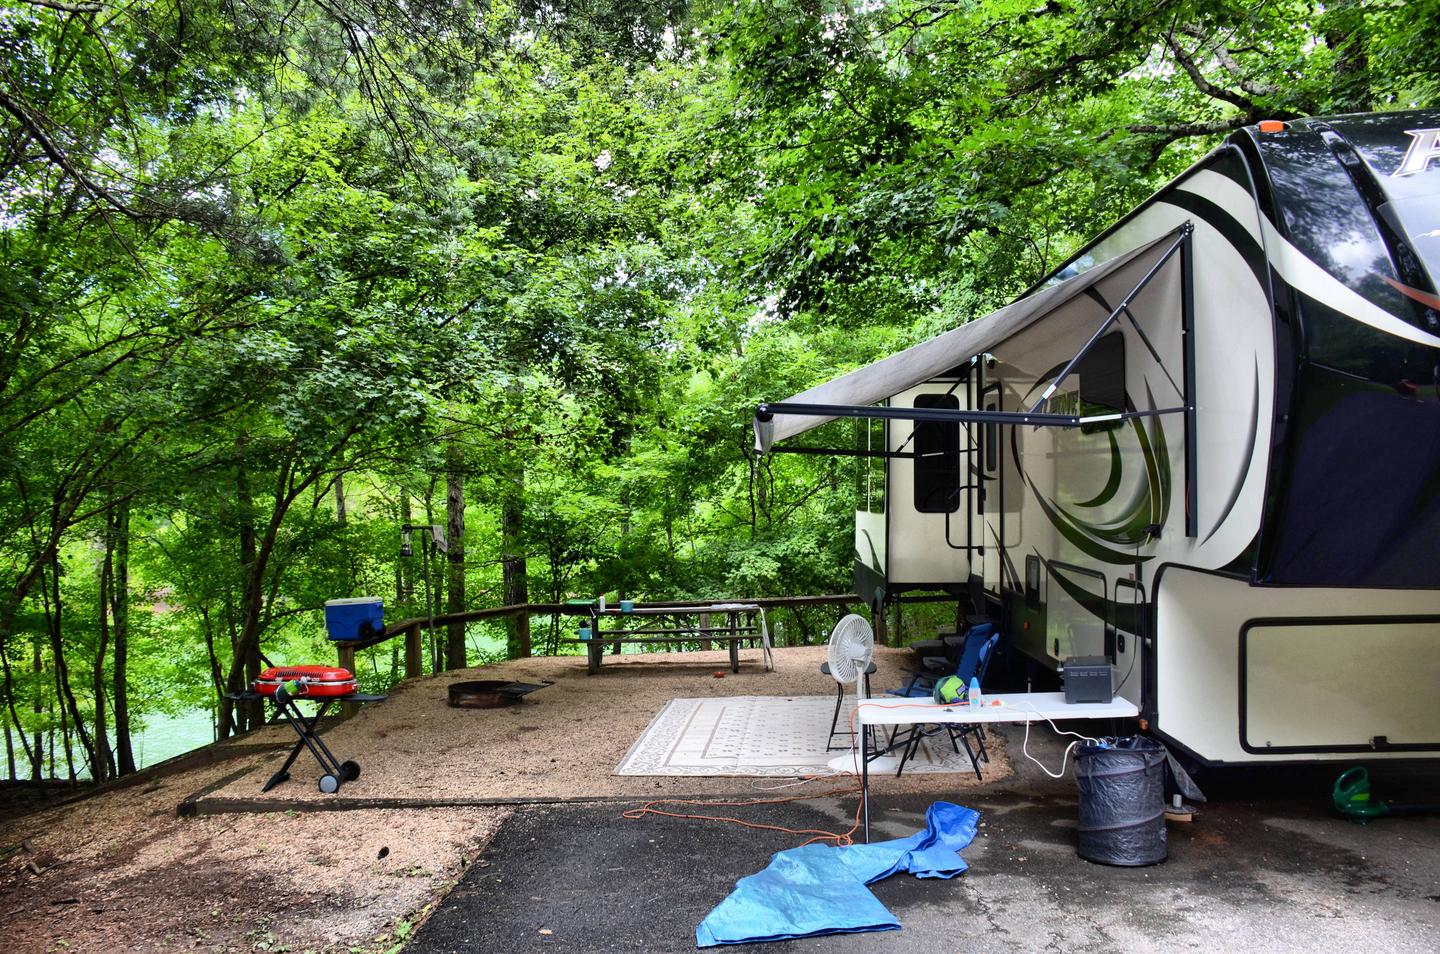 Awning-side clearance, campsite view.McKinney Campground, campsite 81.